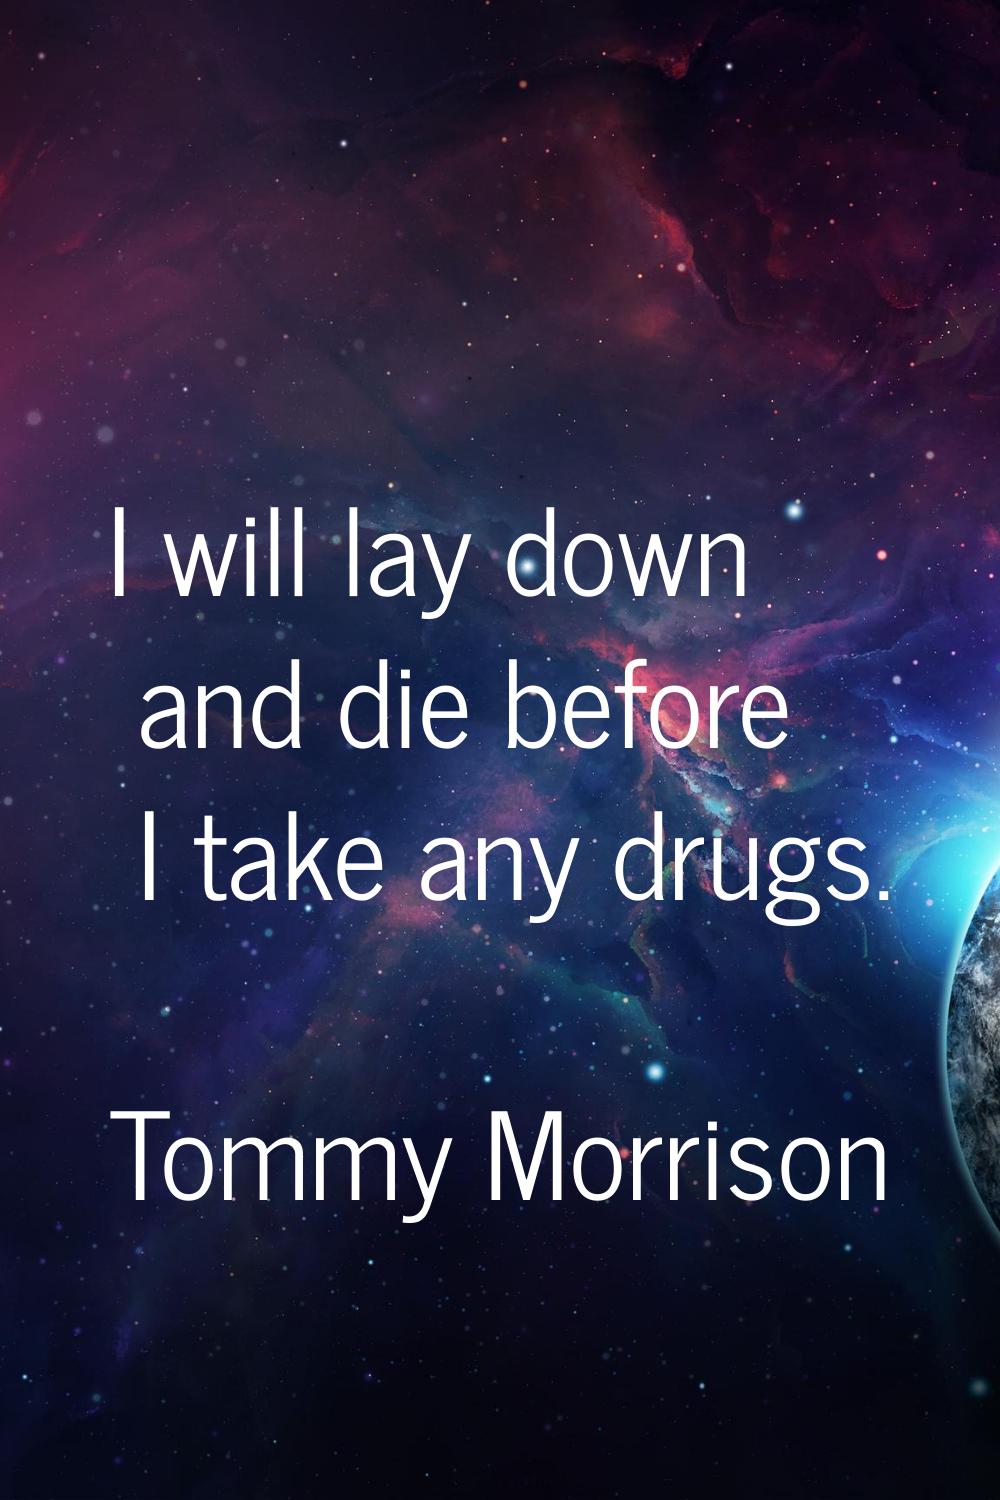 I will lay down and die before I take any drugs.